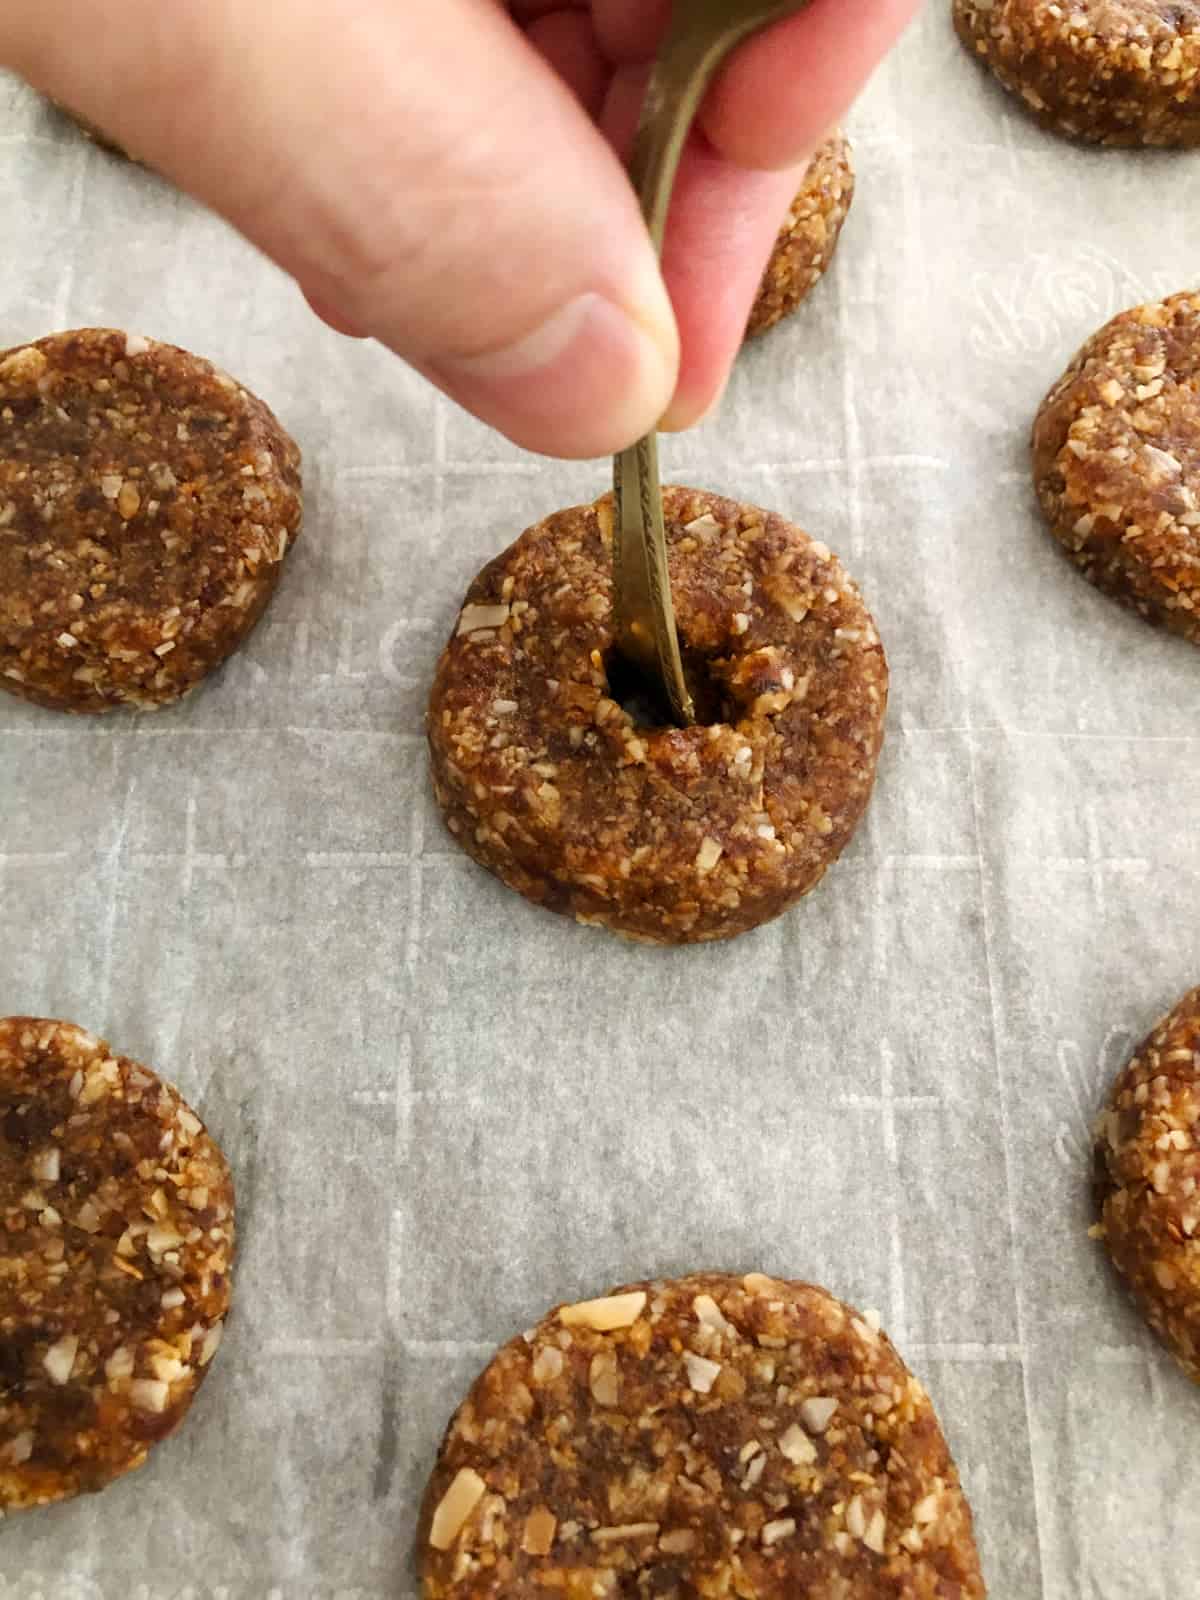 Poking holes in center of Samoas cookies with end of small spoon.